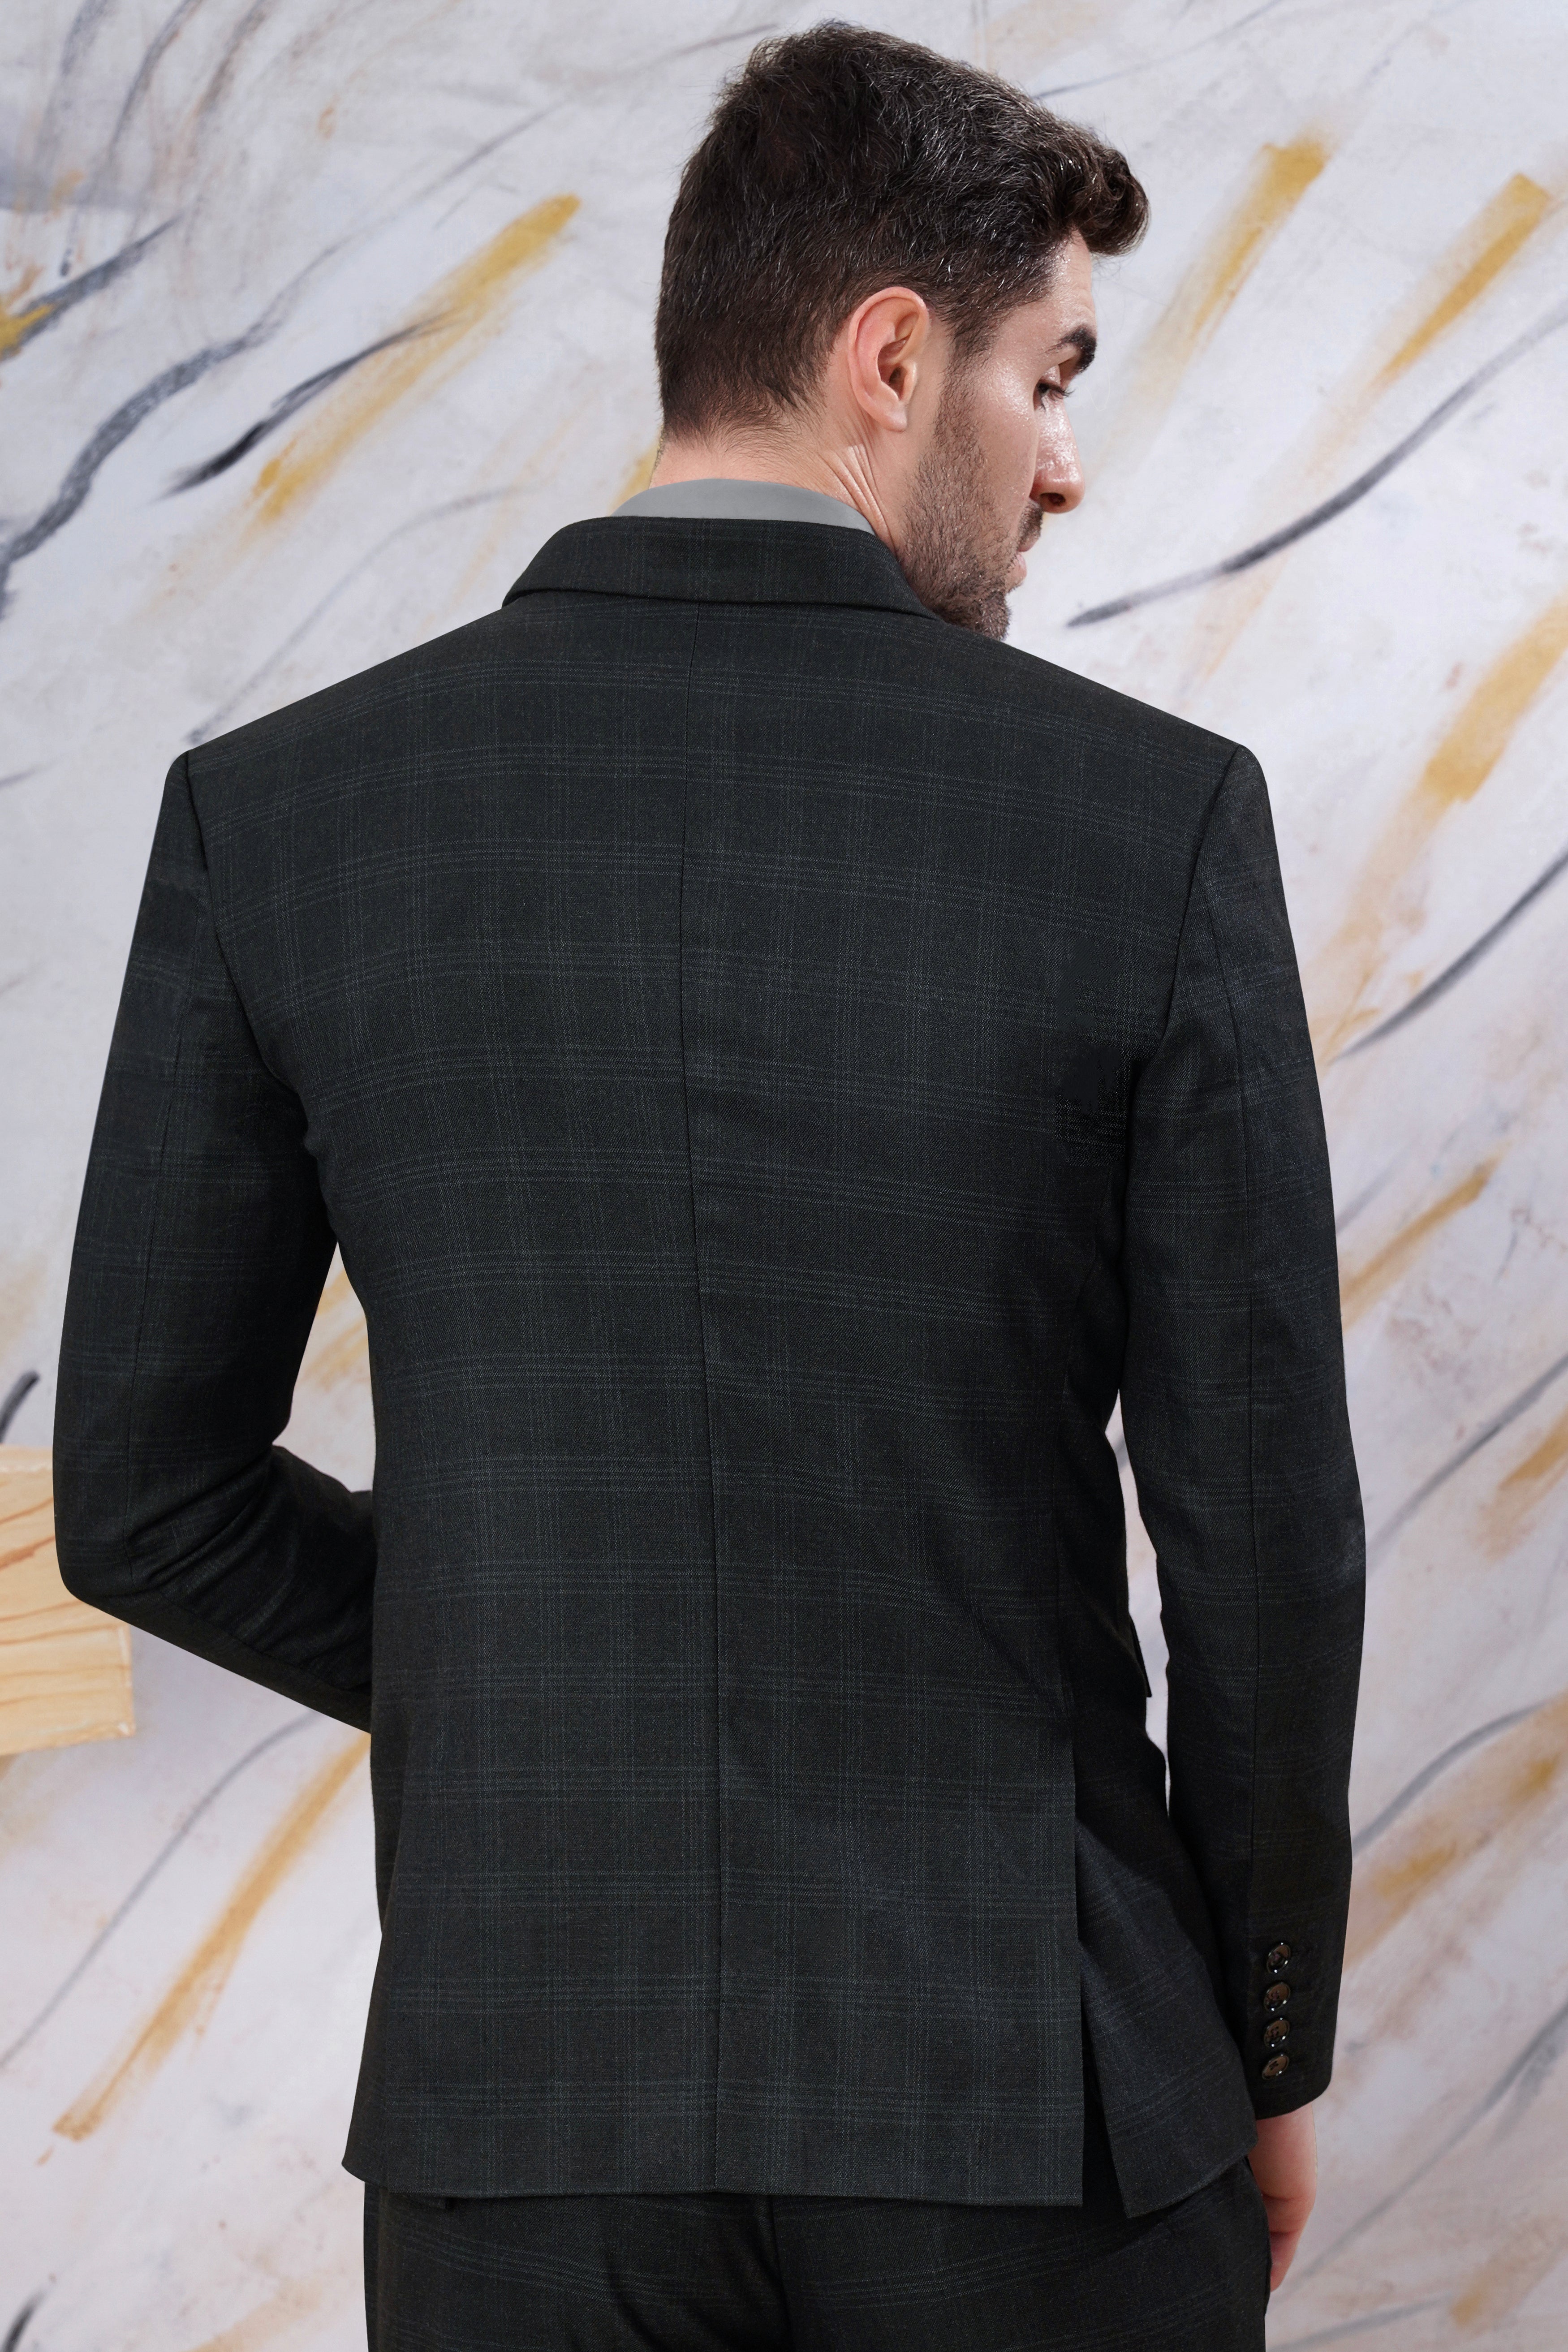 Onyx Black Subtle Checkered Wool Rich Double Breasted Blazer BL2999-DB-36, BL2999-DB-38, BL2999-DB-40, BL2999-DB-42, BL2999-DB-44, BL2999-DB-46, BL2999-DB-48, BL2999-DB-50, BL2999-DB-52, BL2999-DB-54, BL2999-DB-56, BL2999-DB-58, BL2999-DB-60